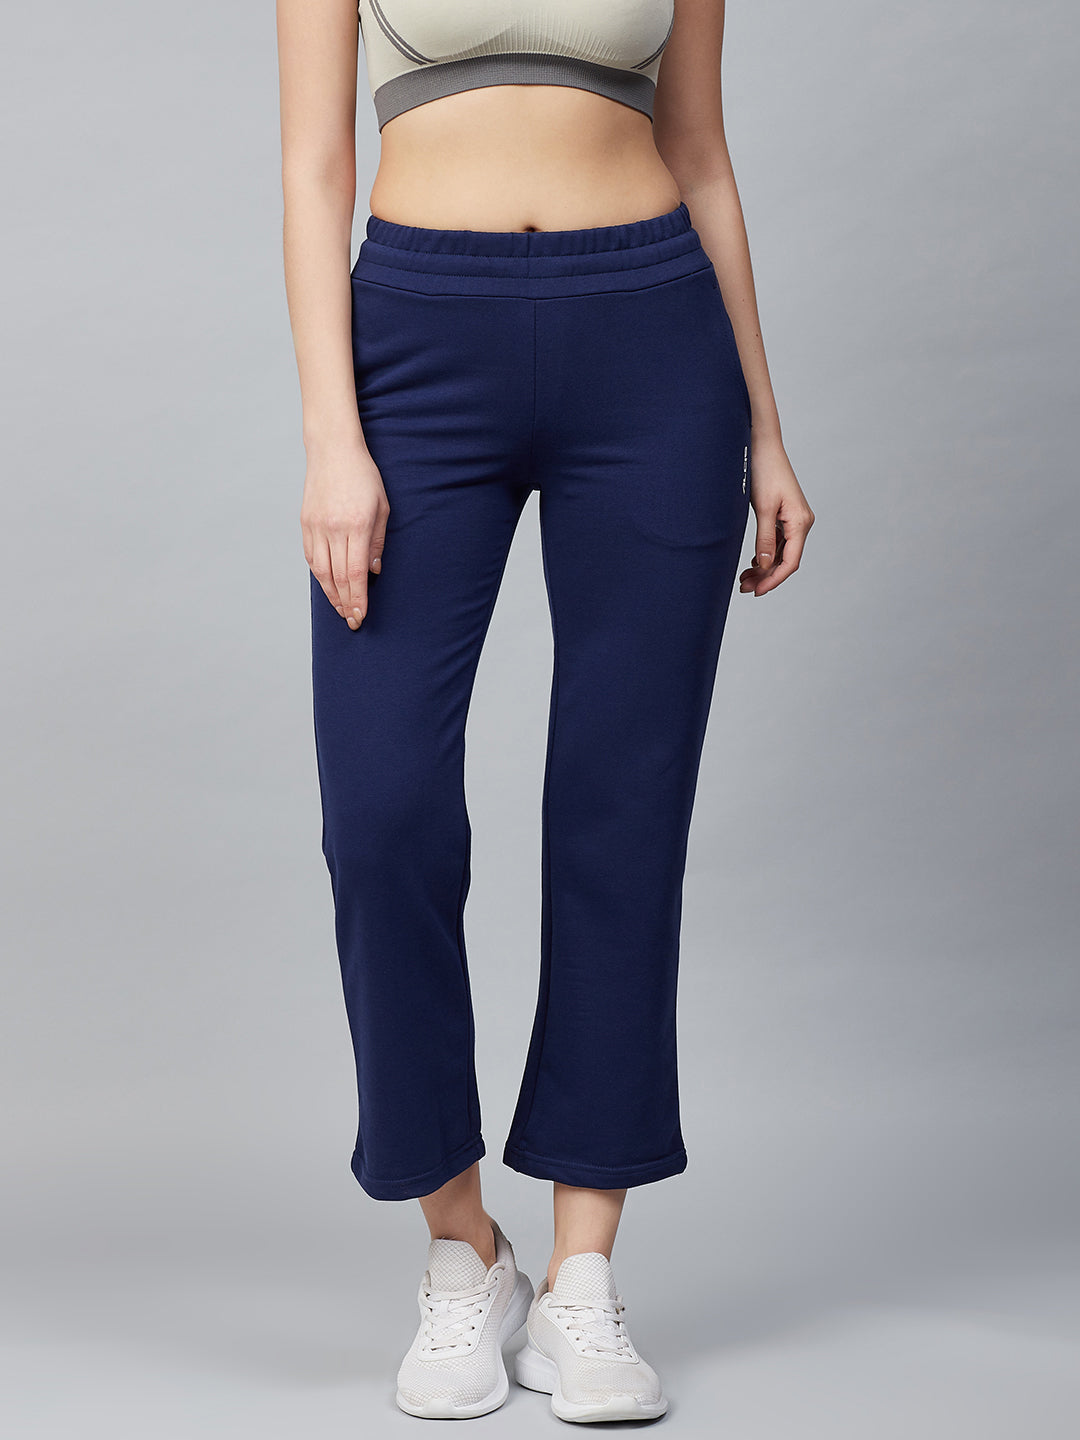 Alcis Women Navy Blue Solid Cropped Track Pants ALWSTPN07001-S